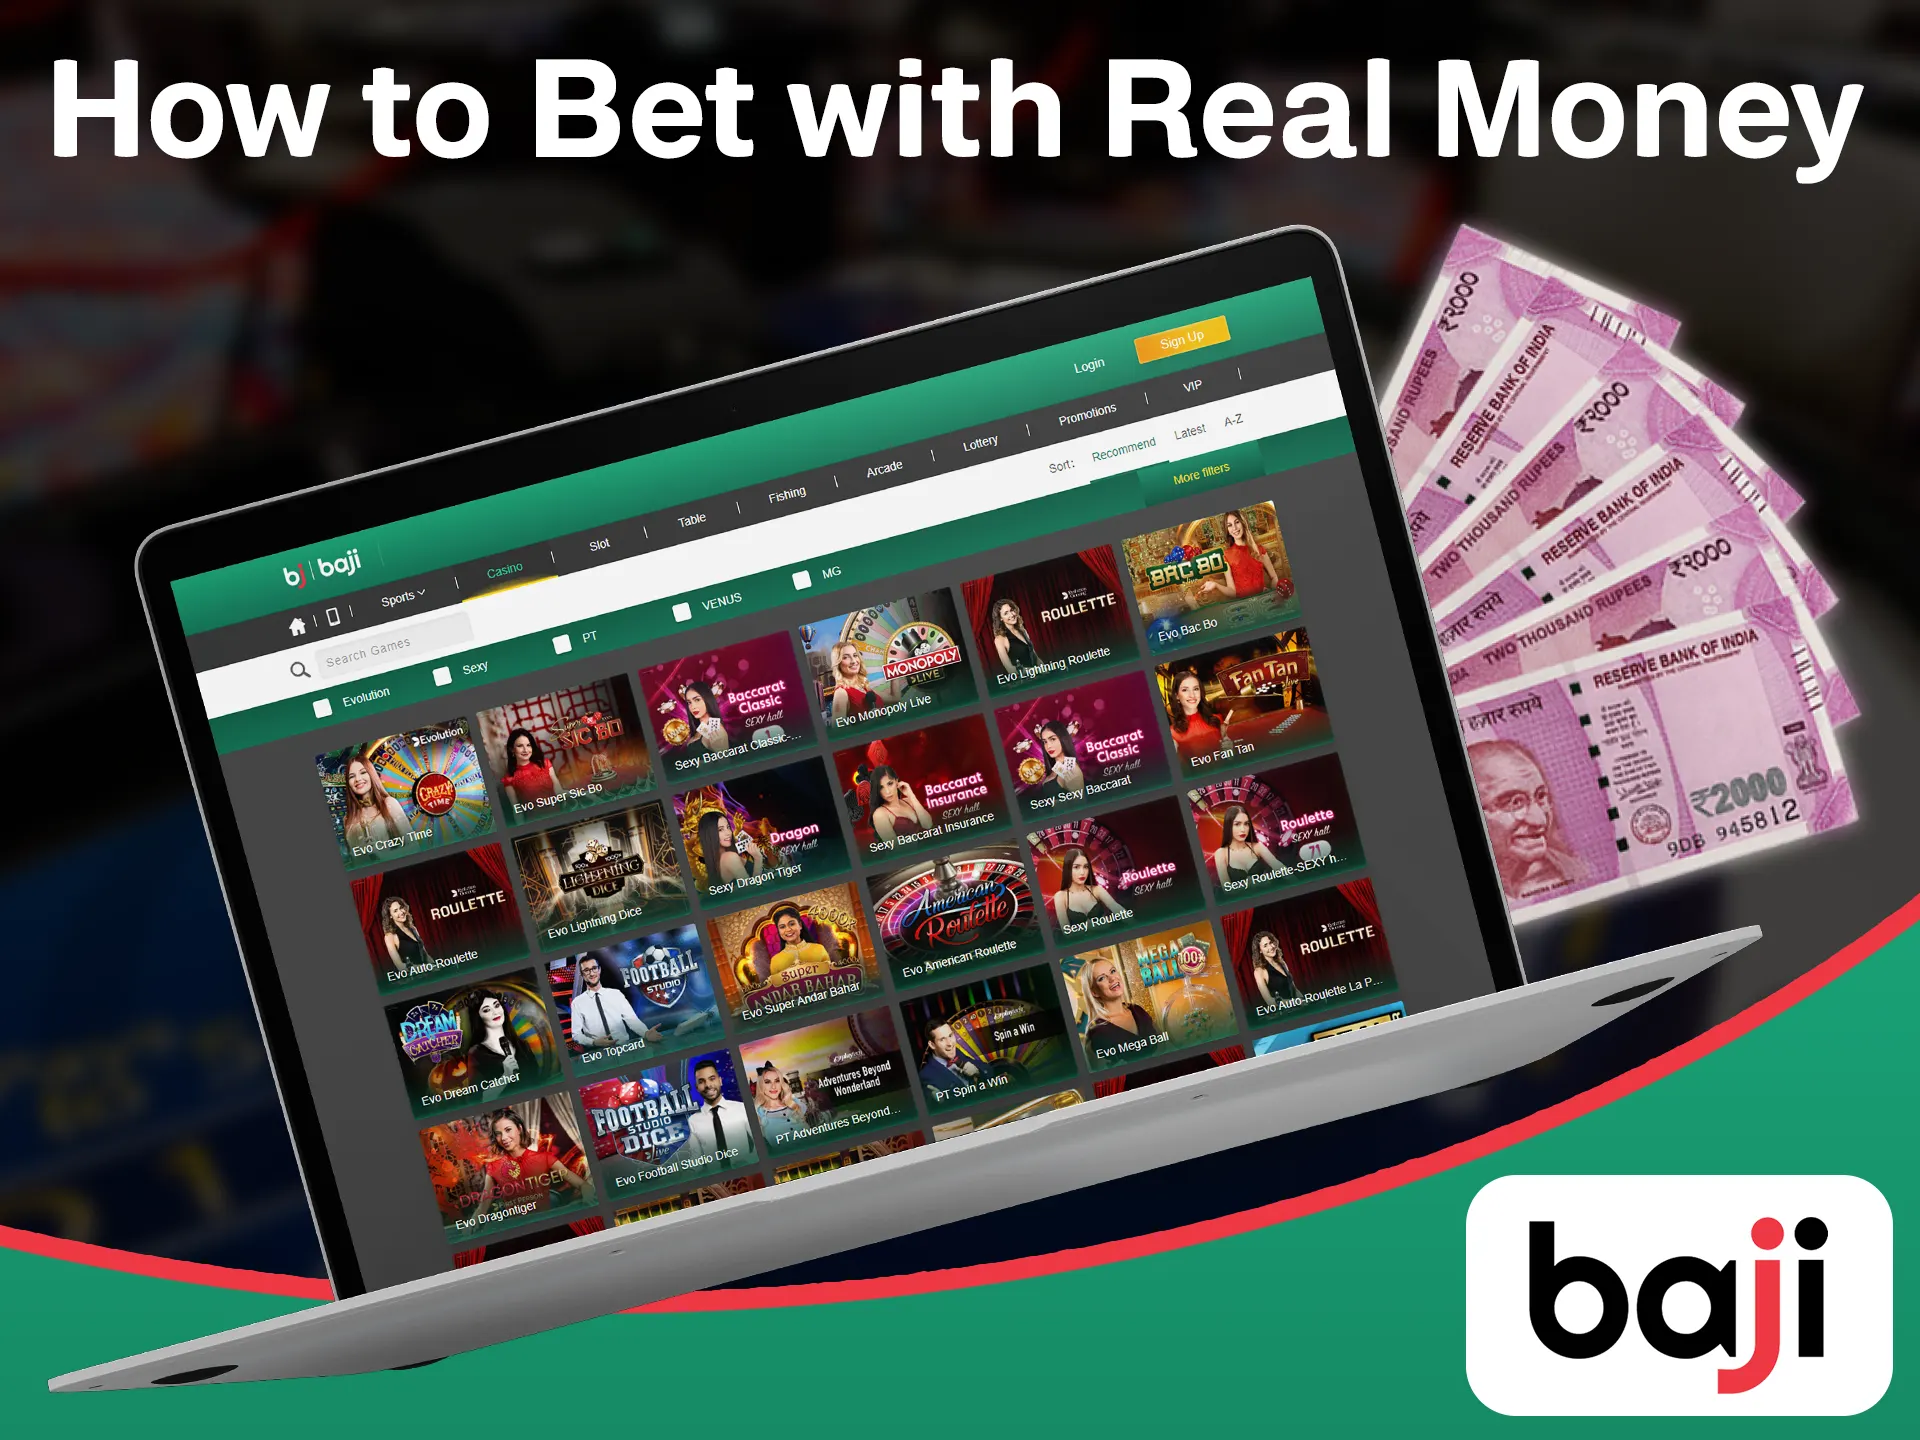 Spend your real money by playing Baji teen patti.